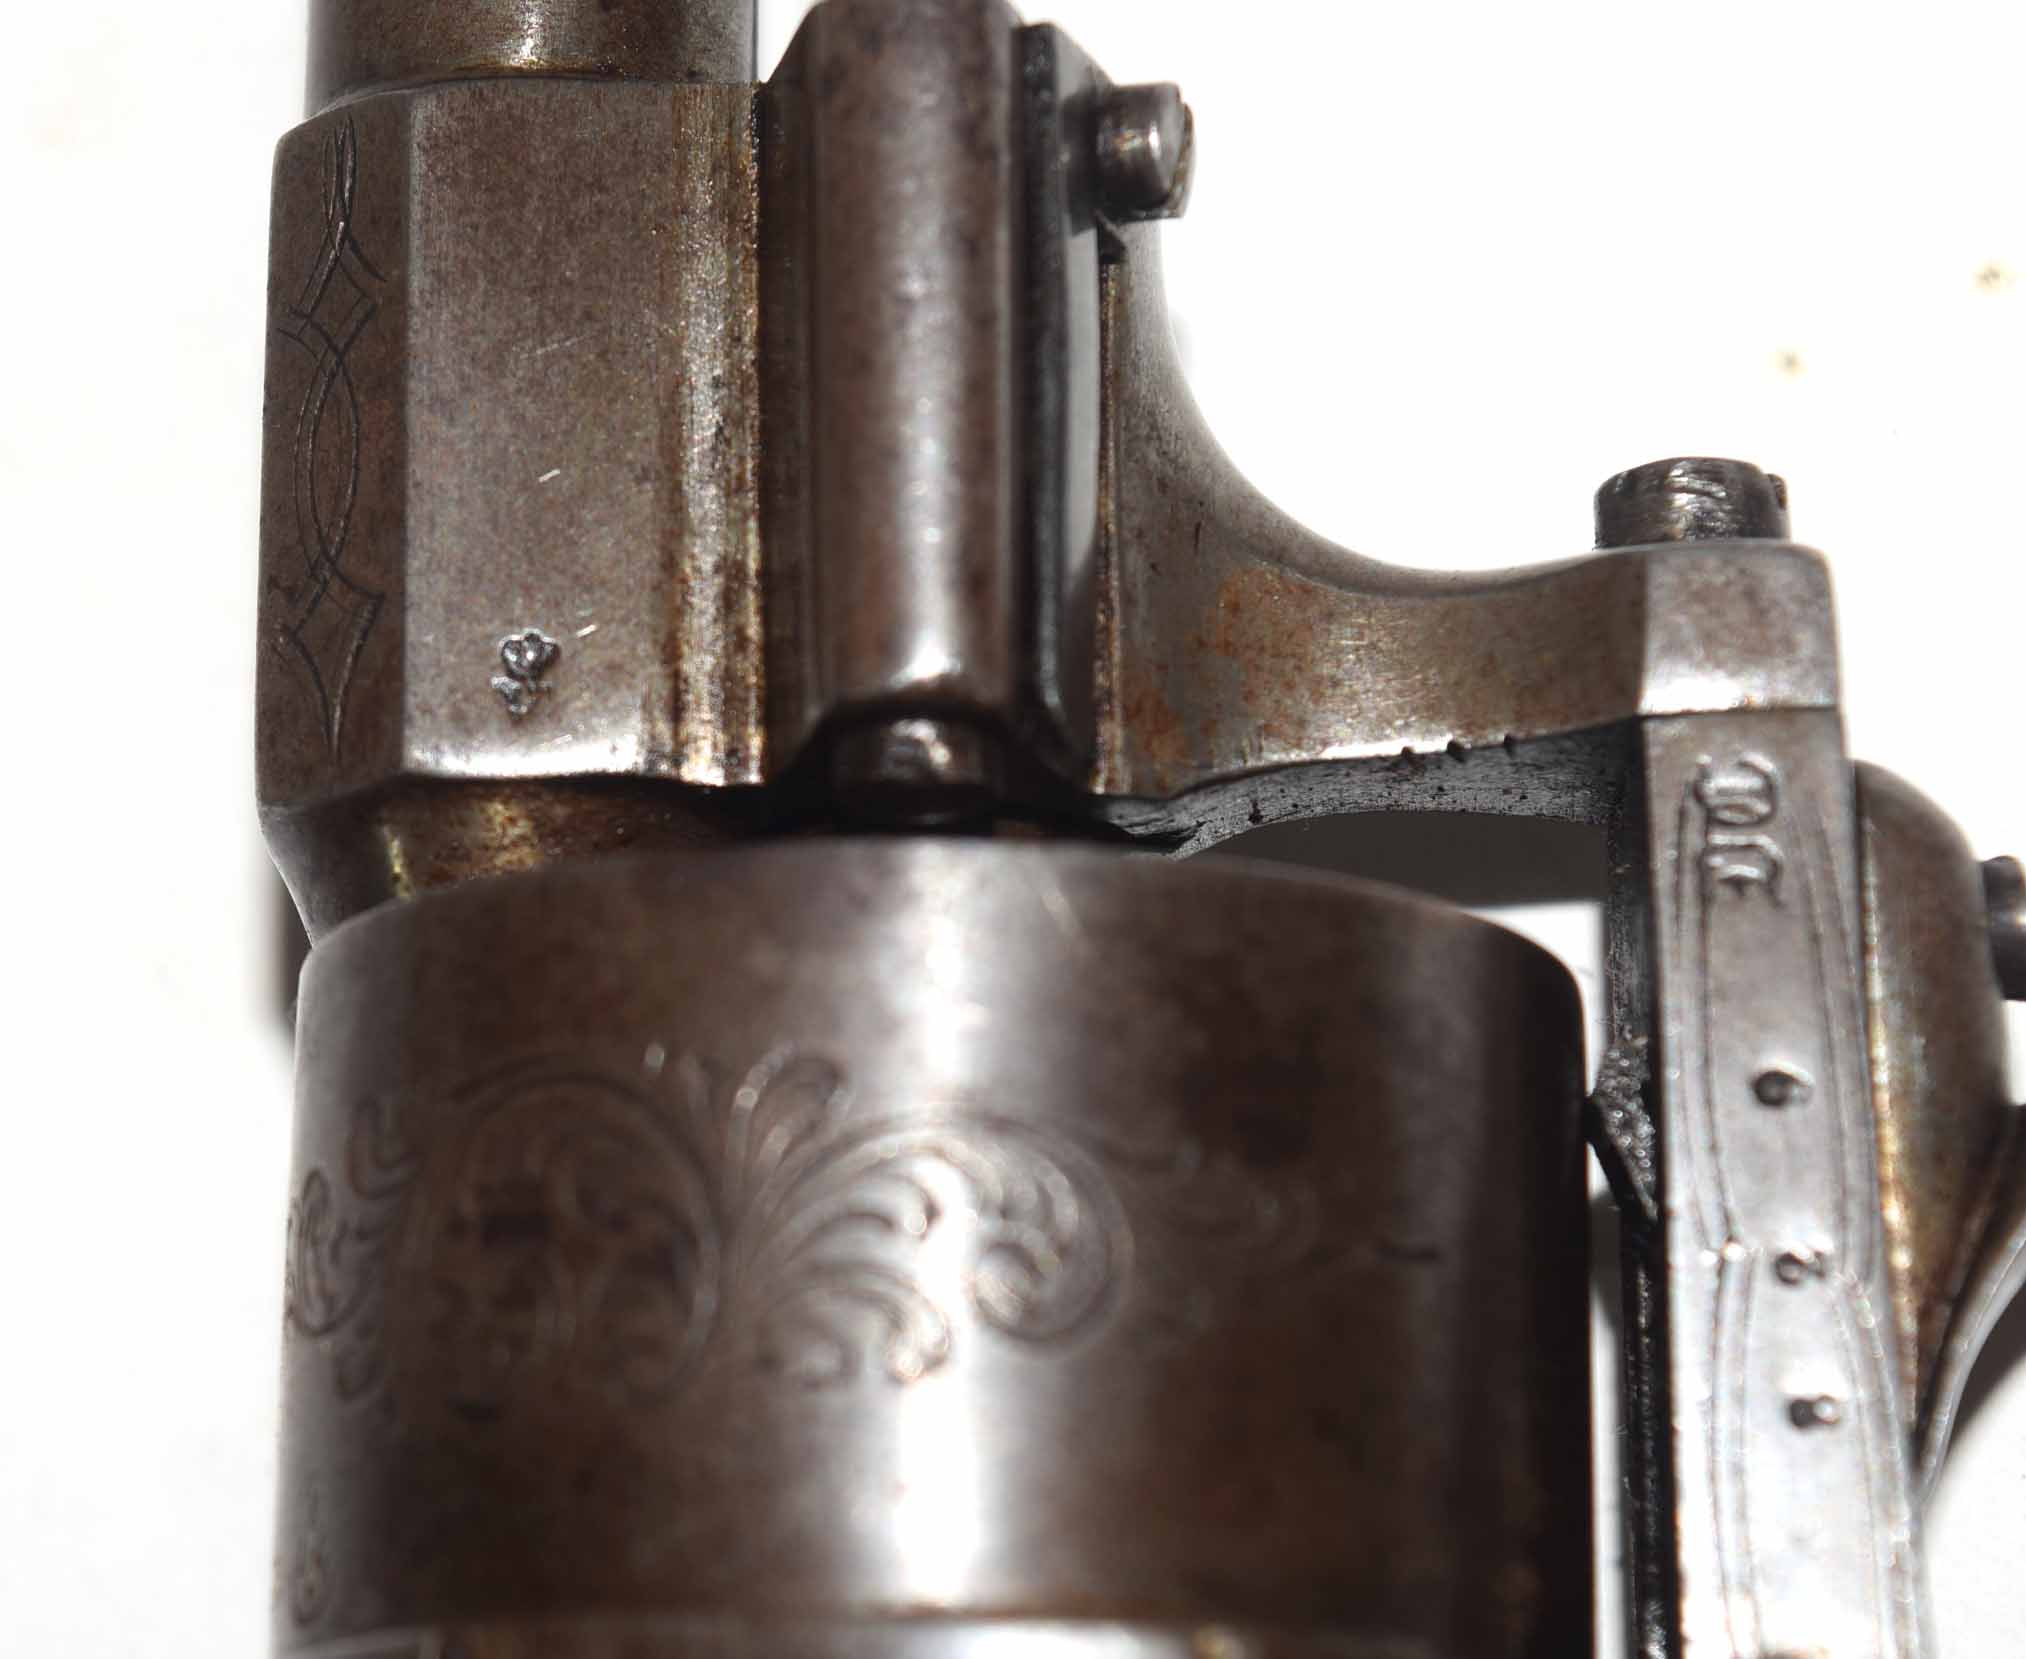 19th century c1880 Liege pin fire revolver, 6-shot double action calibre 12mm pistol with Liege - Image 4 of 7